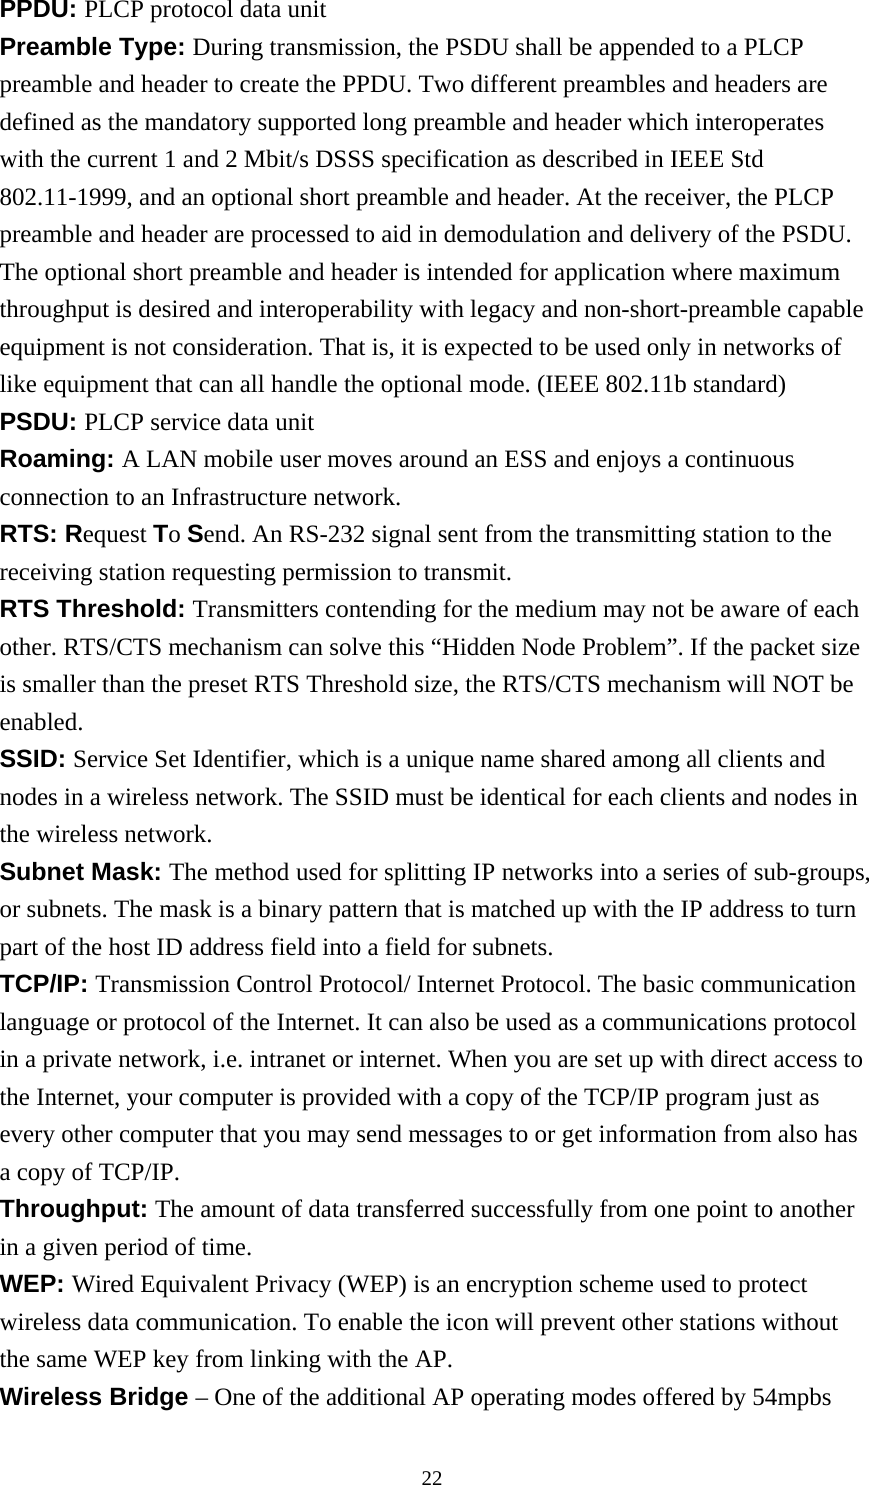  22PPDU: PLCP protocol data unit Preamble Type: During transmission, the PSDU shall be appended to a PLCP preamble and header to create the PPDU. Two different preambles and headers are defined as the mandatory supported long preamble and header which interoperates with the current 1 and 2 Mbit/s DSSS specification as described in IEEE Std 802.11-1999, and an optional short preamble and header. At the receiver, the PLCP preamble and header are processed to aid in demodulation and delivery of the PSDU.   The optional short preamble and header is intended for application where maximum throughput is desired and interoperability with legacy and non-short-preamble capable equipment is not consideration. That is, it is expected to be used only in networks of like equipment that can all handle the optional mode. (IEEE 802.11b standard) PSDU: PLCP service data unit Roaming: A LAN mobile user moves around an ESS and enjoys a continuous connection to an Infrastructure network. RTS: Request To Send. An RS-232 signal sent from the transmitting station to the receiving station requesting permission to transmit. RTS Threshold: Transmitters contending for the medium may not be aware of each other. RTS/CTS mechanism can solve this “Hidden Node Problem”. If the packet size is smaller than the preset RTS Threshold size, the RTS/CTS mechanism will NOT be enabled. SSID: Service Set Identifier, which is a unique name shared among all clients and nodes in a wireless network. The SSID must be identical for each clients and nodes in the wireless network. Subnet Mask: The method used for splitting IP networks into a series of sub-groups, or subnets. The mask is a binary pattern that is matched up with the IP address to turn part of the host ID address field into a field for subnets. TCP/IP: Transmission Control Protocol/ Internet Protocol. The basic communication language or protocol of the Internet. It can also be used as a communications protocol in a private network, i.e. intranet or internet. When you are set up with direct access to the Internet, your computer is provided with a copy of the TCP/IP program just as every other computer that you may send messages to or get information from also has a copy of TCP/IP. Throughput: The amount of data transferred successfully from one point to another in a given period of time. WEP: Wired Equivalent Privacy (WEP) is an encryption scheme used to protect wireless data communication. To enable the icon will prevent other stations without the same WEP key from linking with the AP. Wireless Bridge – One of the additional AP operating modes offered by 54mpbs 